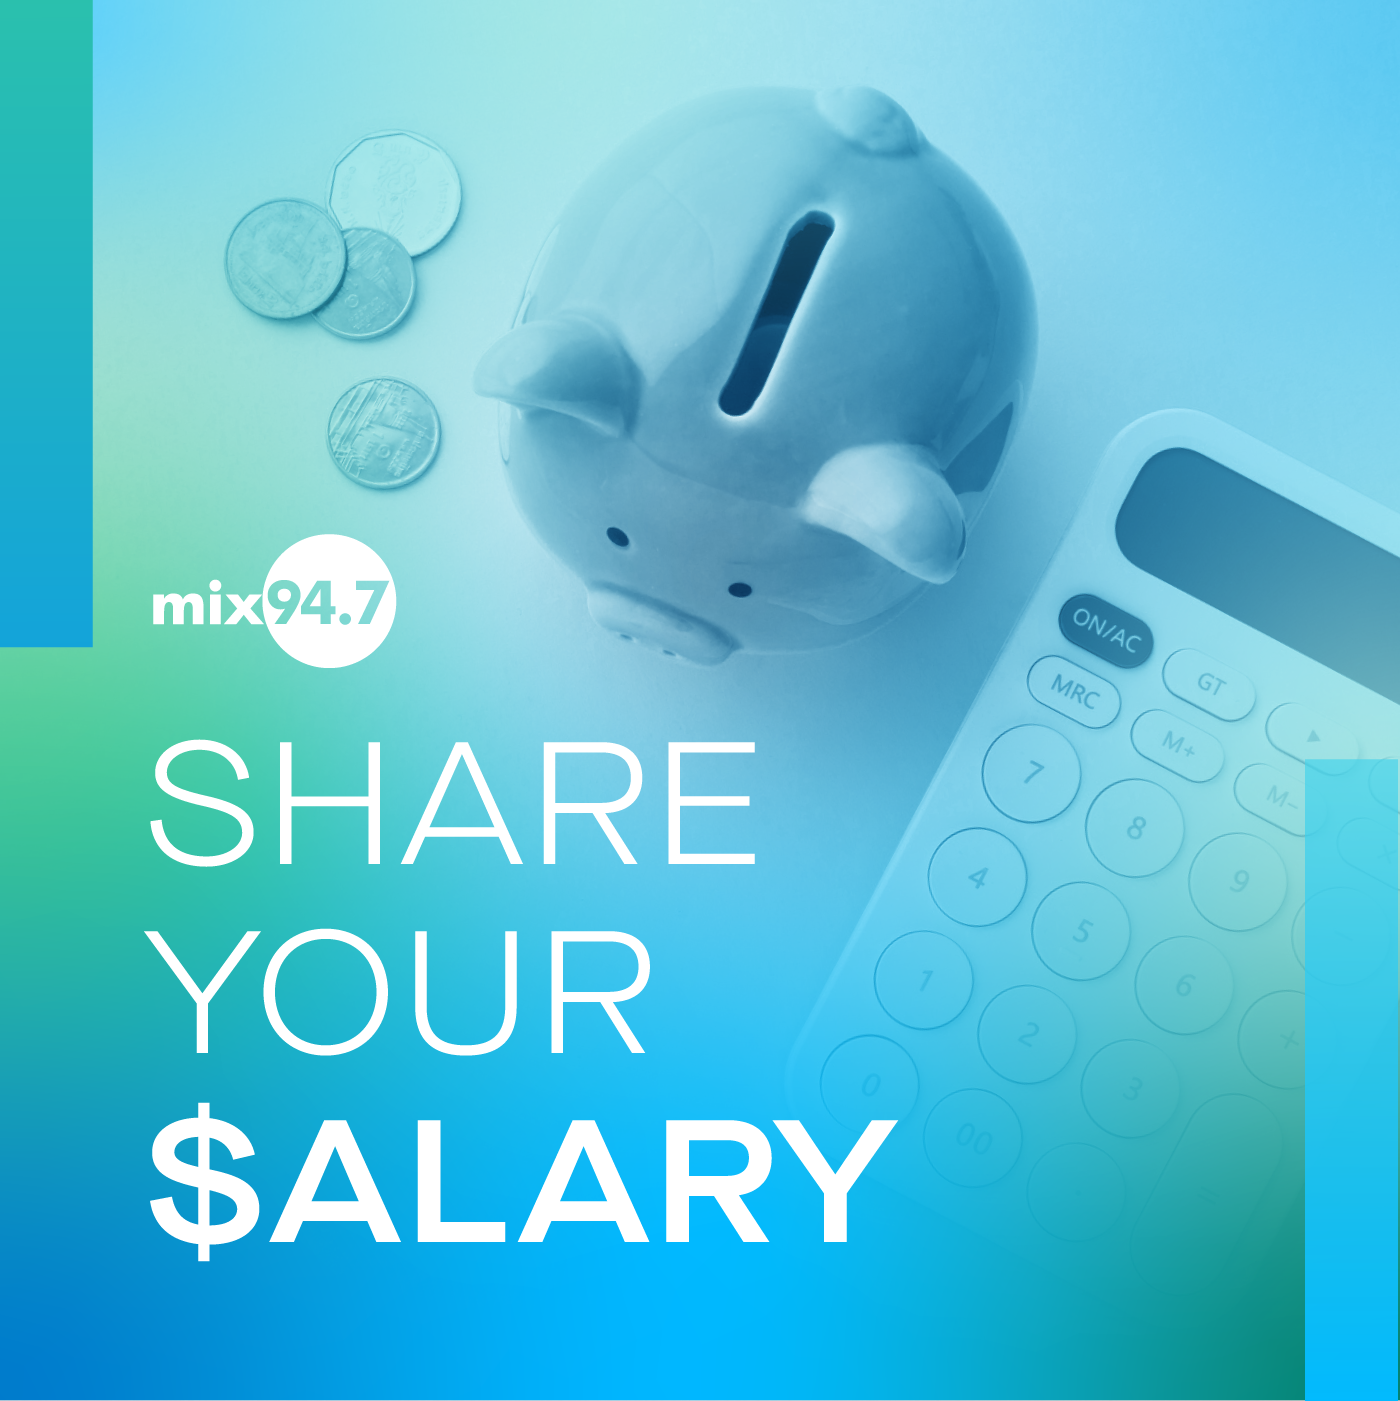 Share Your Salary: "C-Ross" is a inside sales specialist for a real estate  company